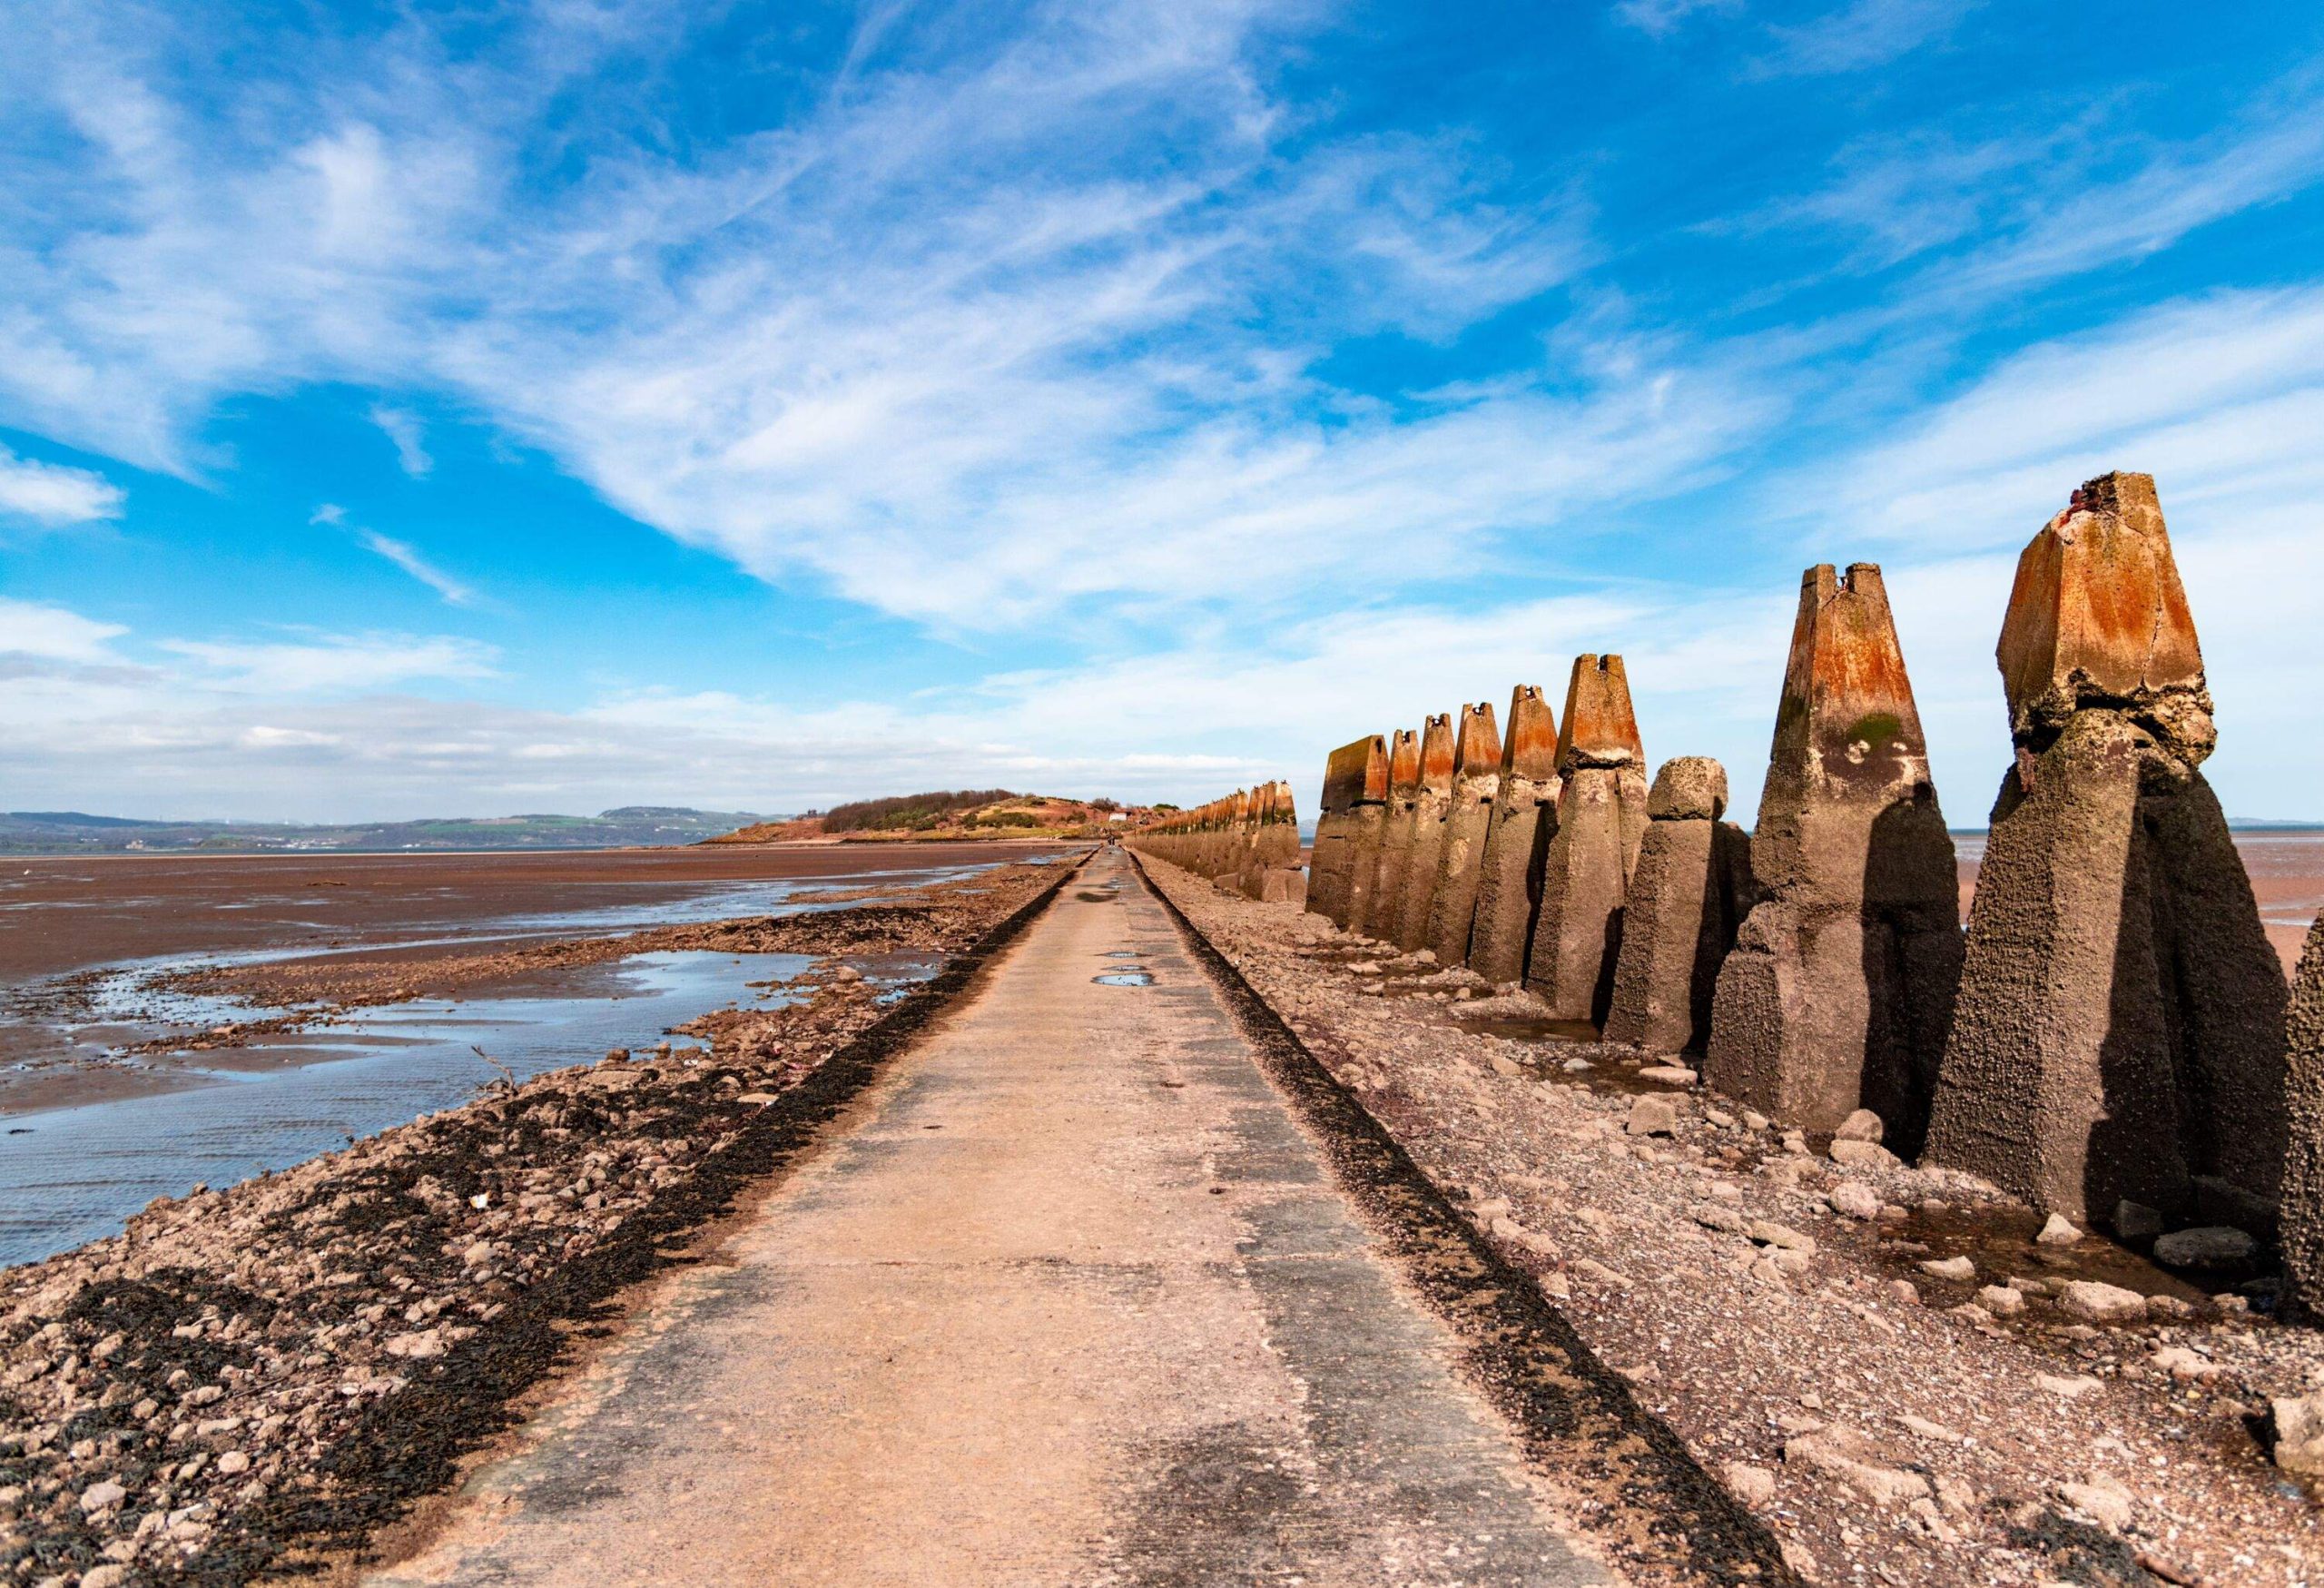 Causeway to Cramond Island in Edinburgh, Scotland, emerged at low tide. To the side, appears a WWII anti-tank barricade